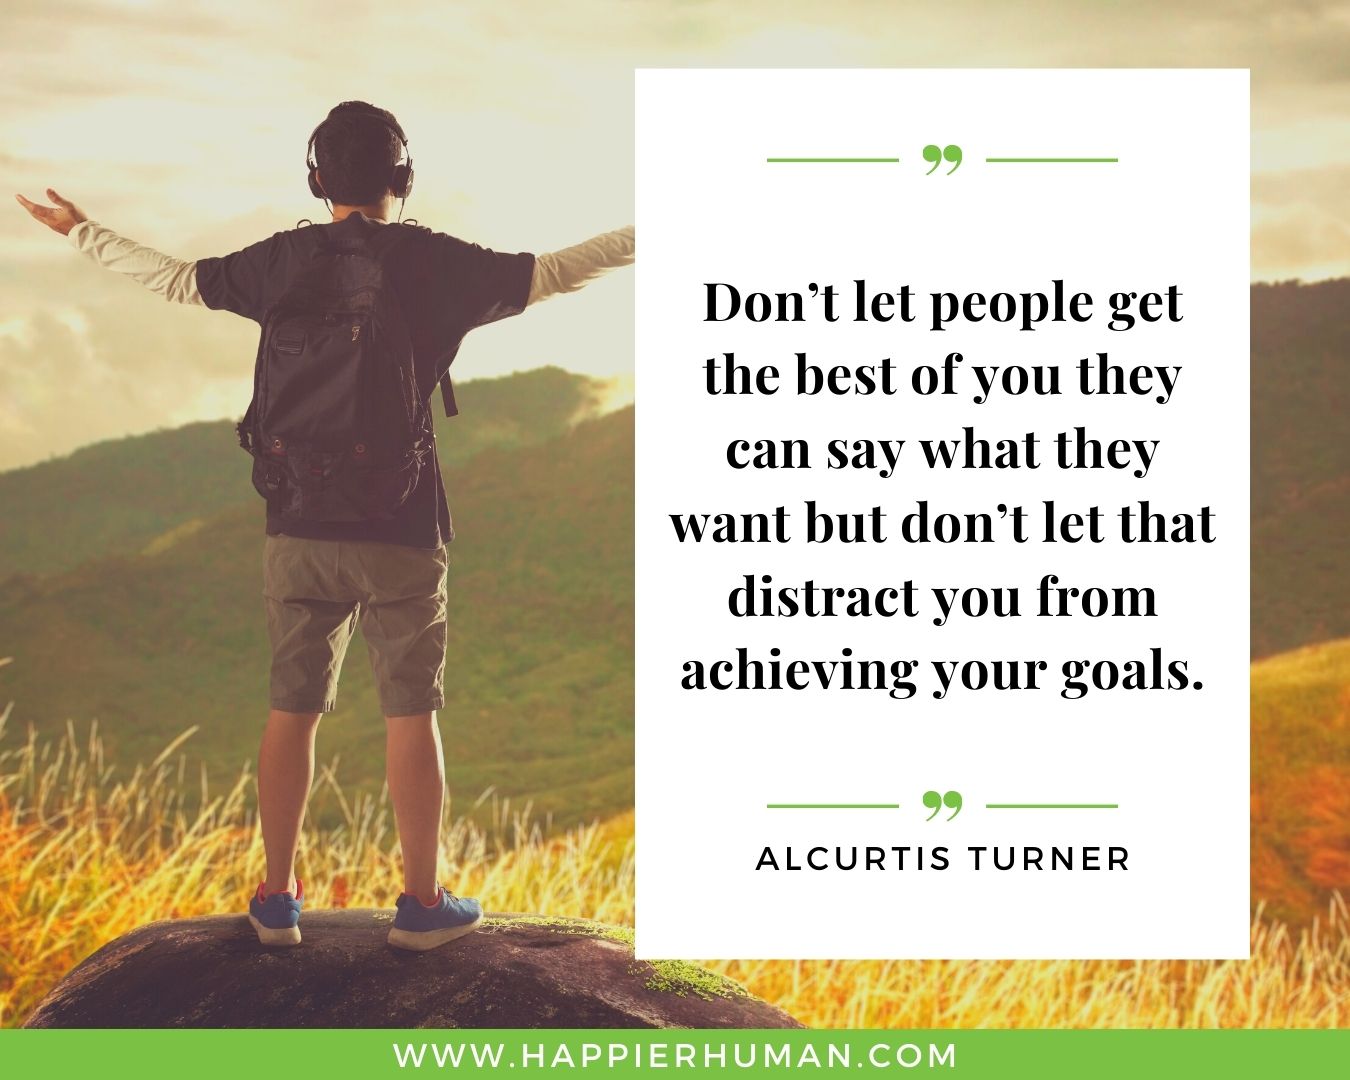 Toxic People Quotes - “Don’t let people get the best of you they can say what they want but don’t let that distract you from achieving your goals.” – Alcurtis Turner